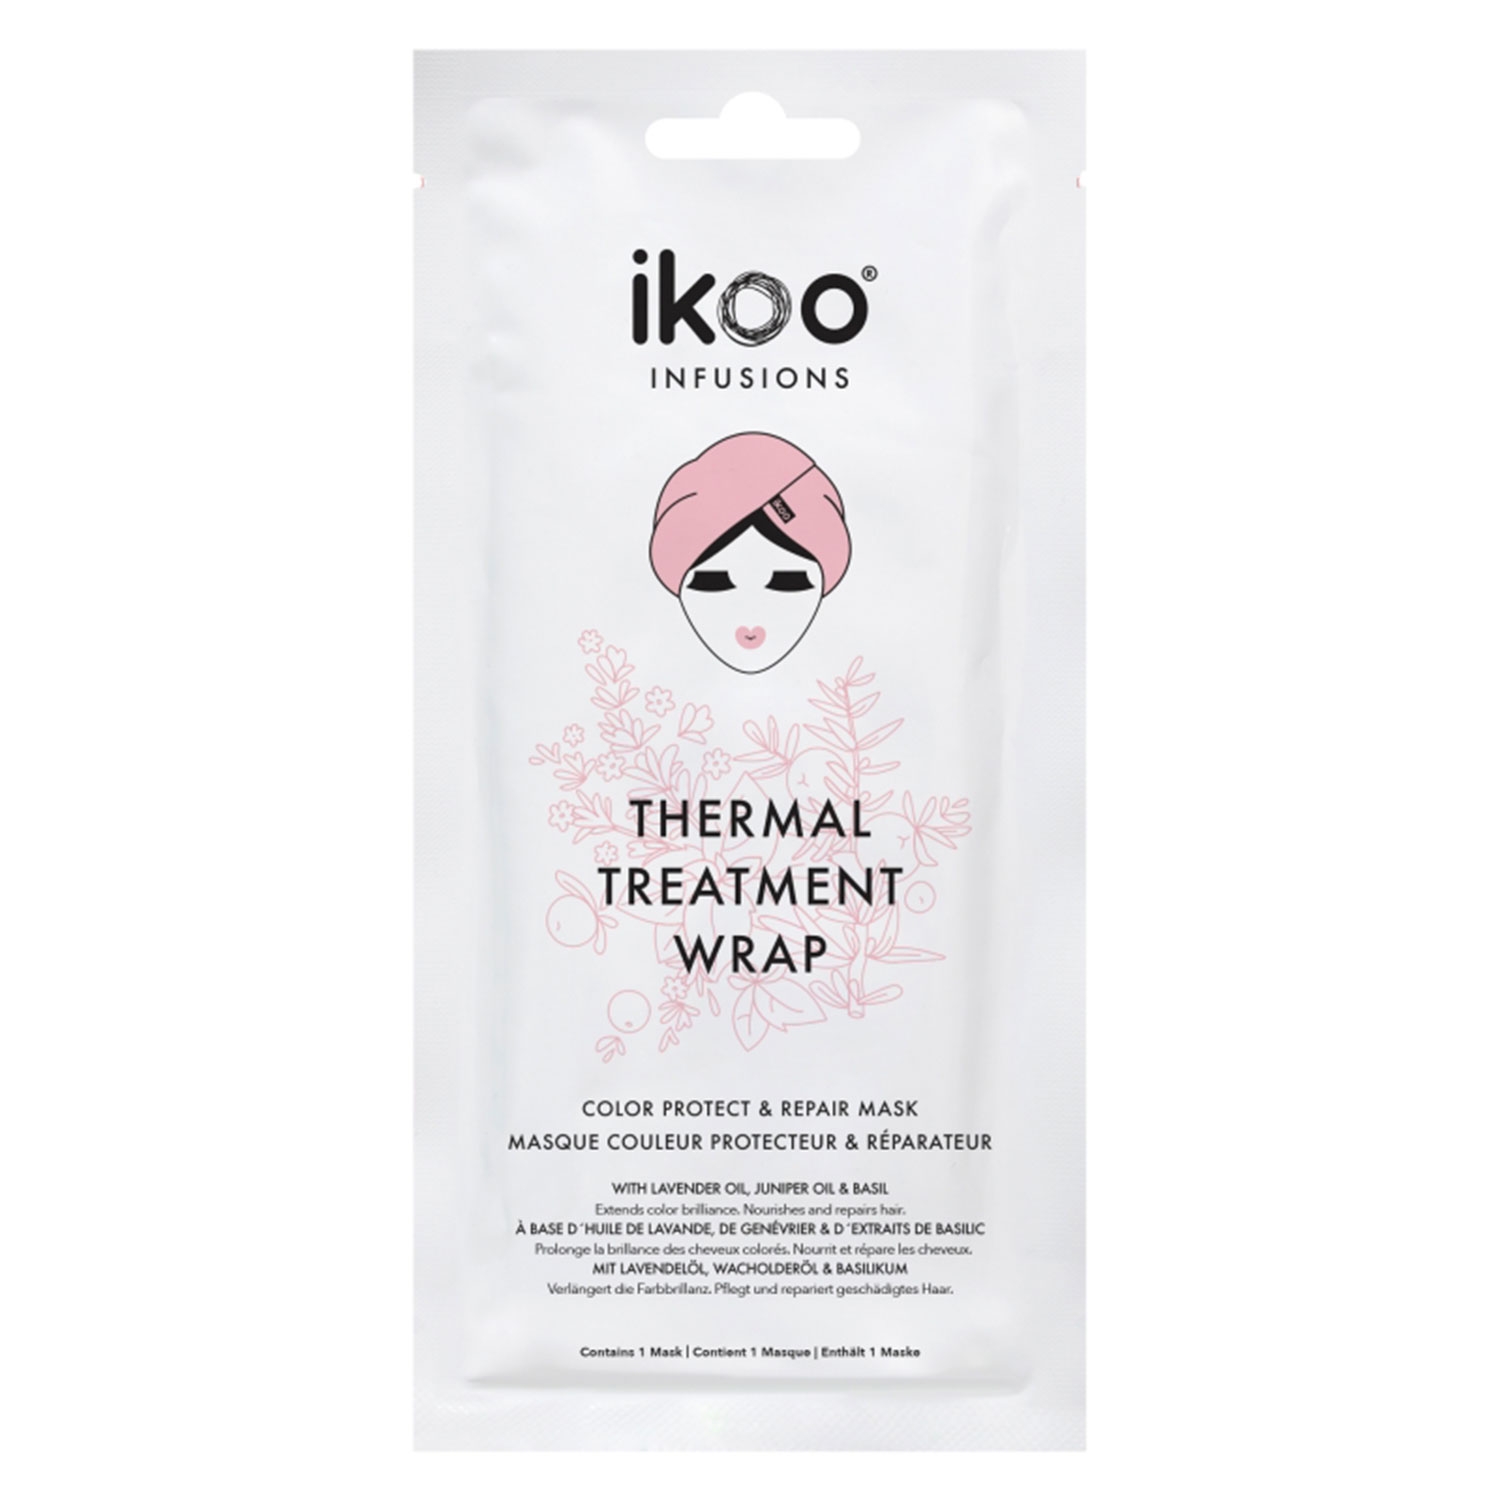 Product image from ikoo infusions - Color Protect & Repair Thermal Treatment Wrap